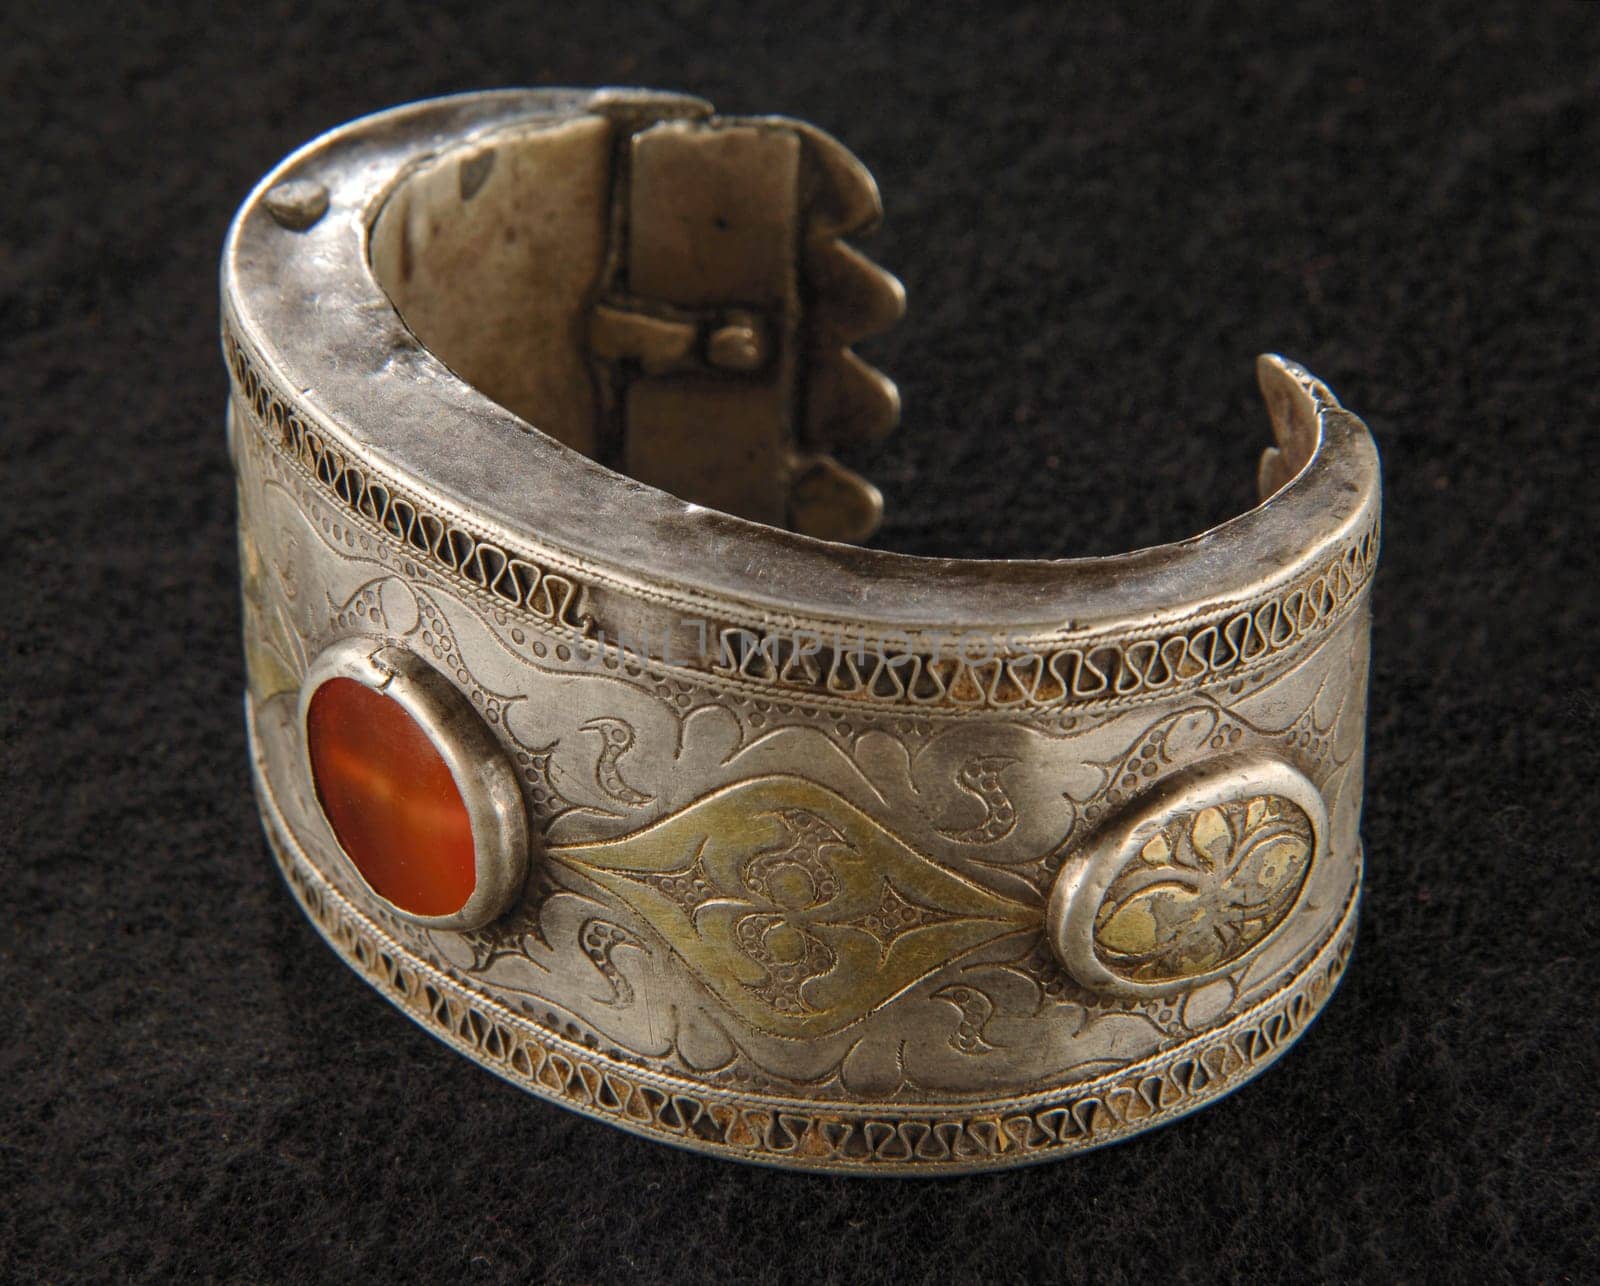 An antique bracelet with engraving and precious stones isolated on a black background